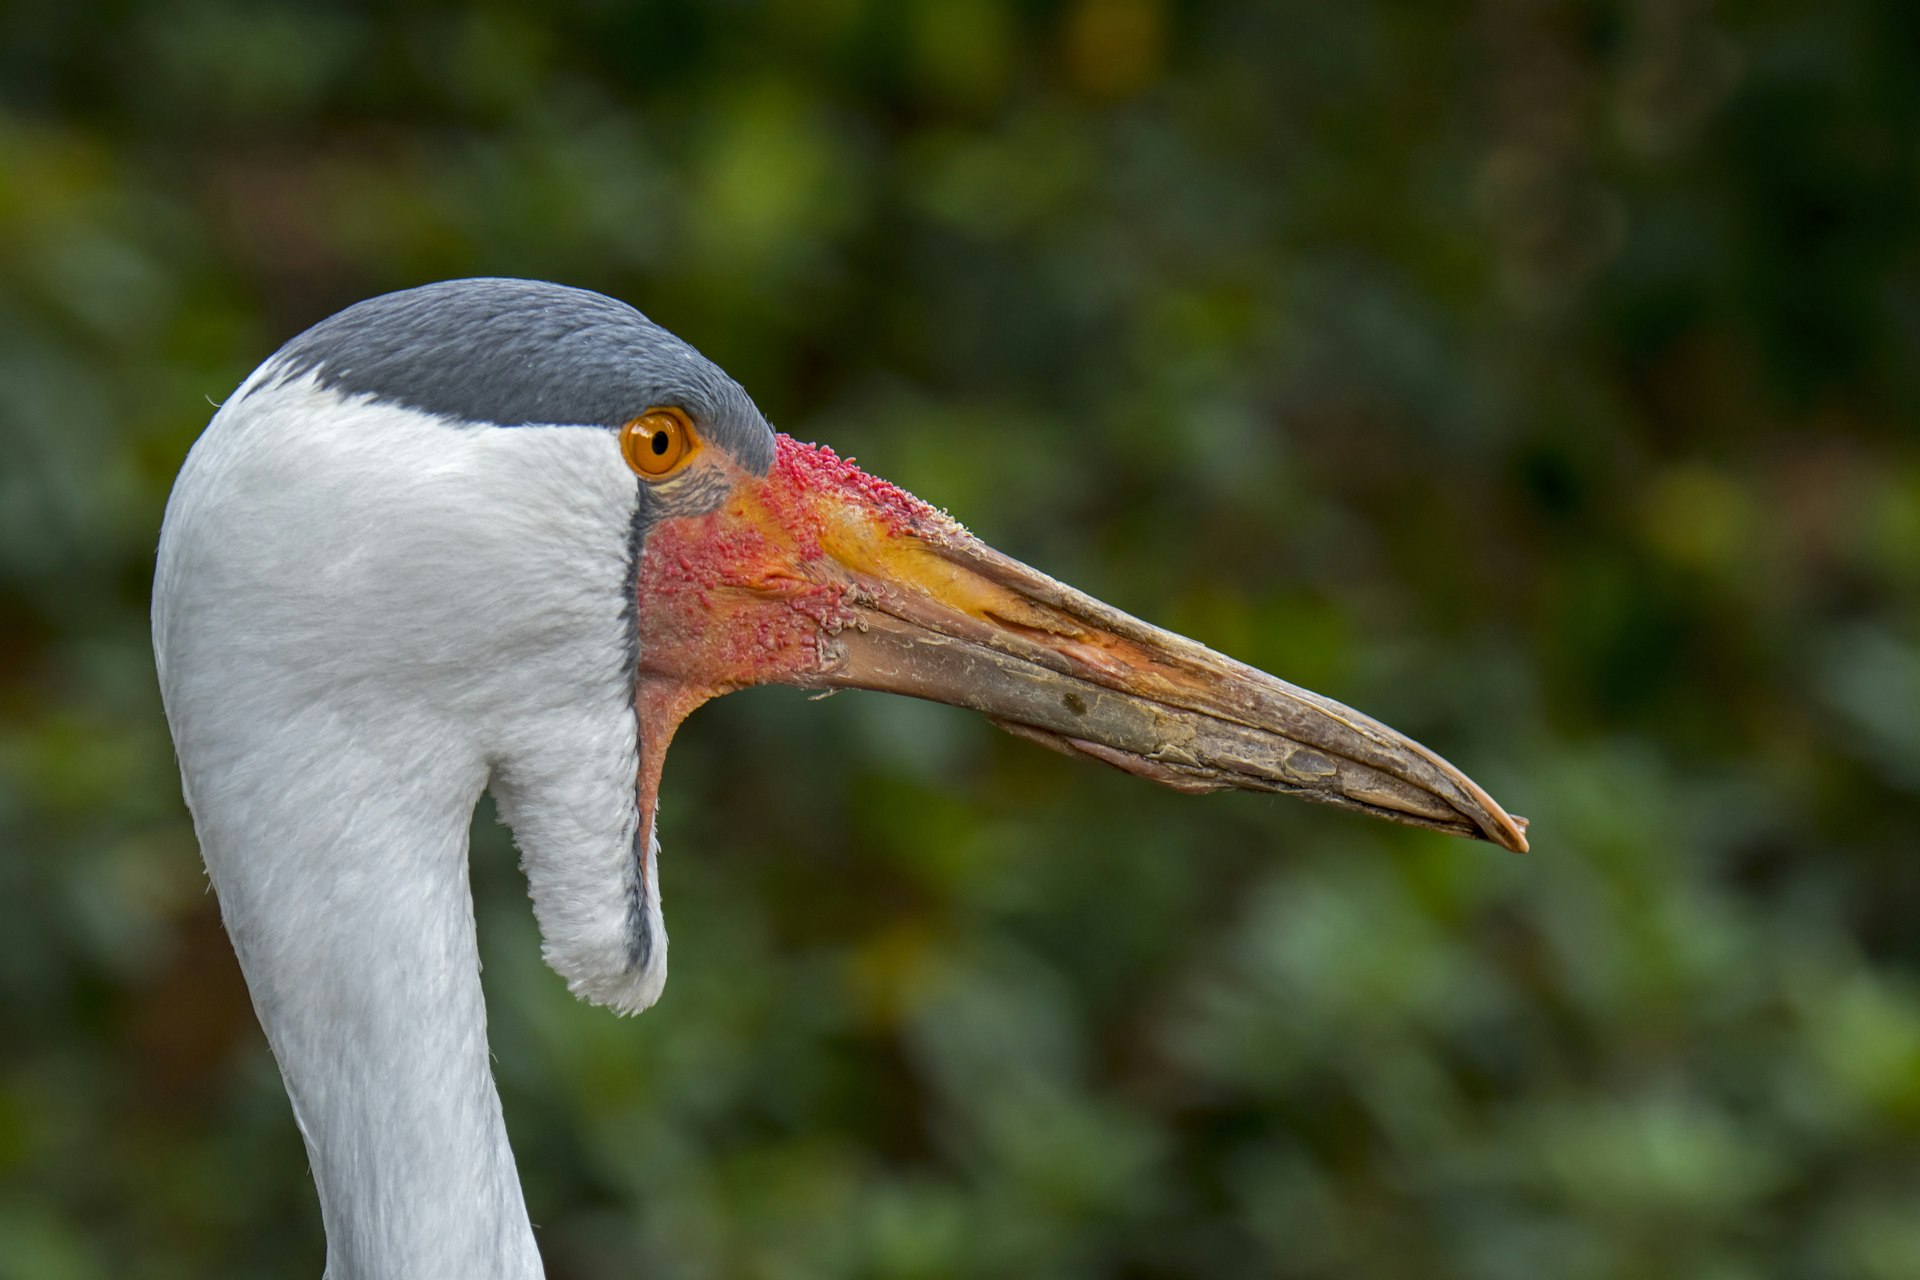 A close-up portrait of wattled crane (Grus carunculata), with a long orange beak, white neck, gray feathers on the top of the head, and a wattle